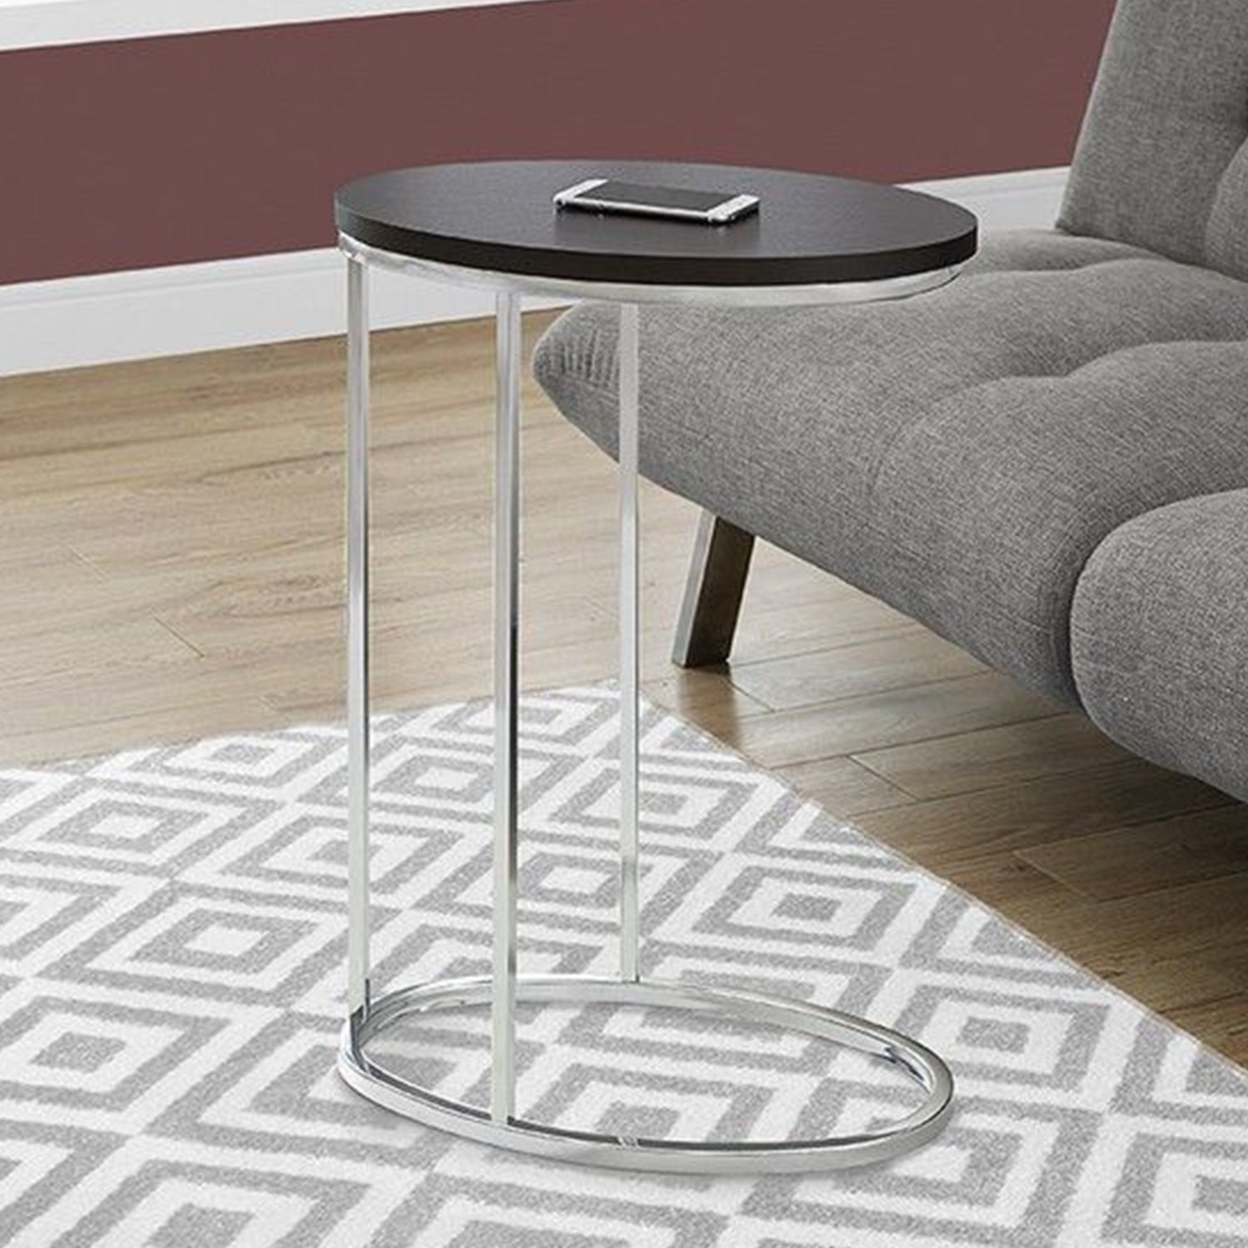 18.5" x 12" x 25" Dark Taupe Particle Board Laminate Metal Accent Table - Cappuccino